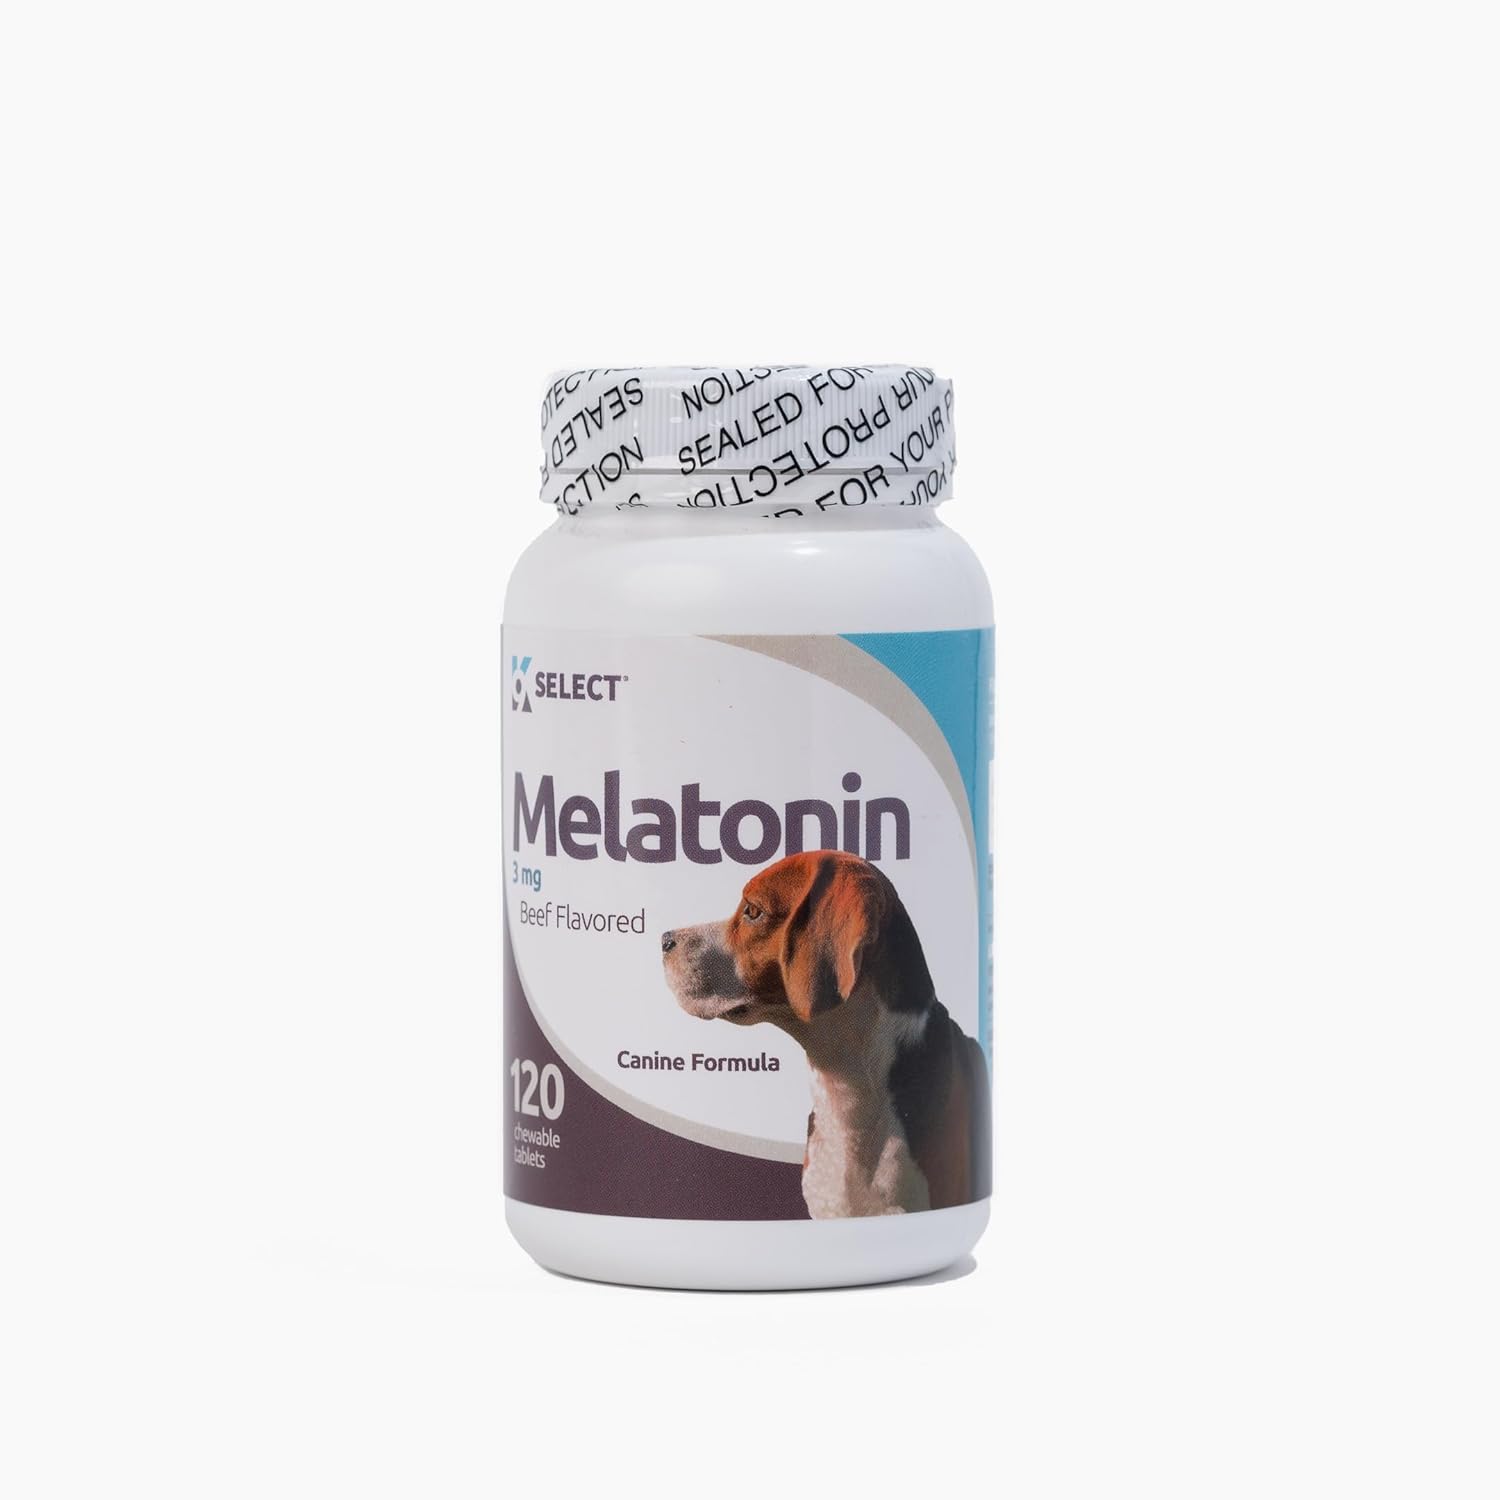 Melatonin for Dogs, 3 mg - 120 Beef Flavored Chewable Tablets - Dog Melatonin for Smaller Breeds - Gentle Well-Being Enhancer - Healthy, Tasty Dog Treats That Promote Overall Health